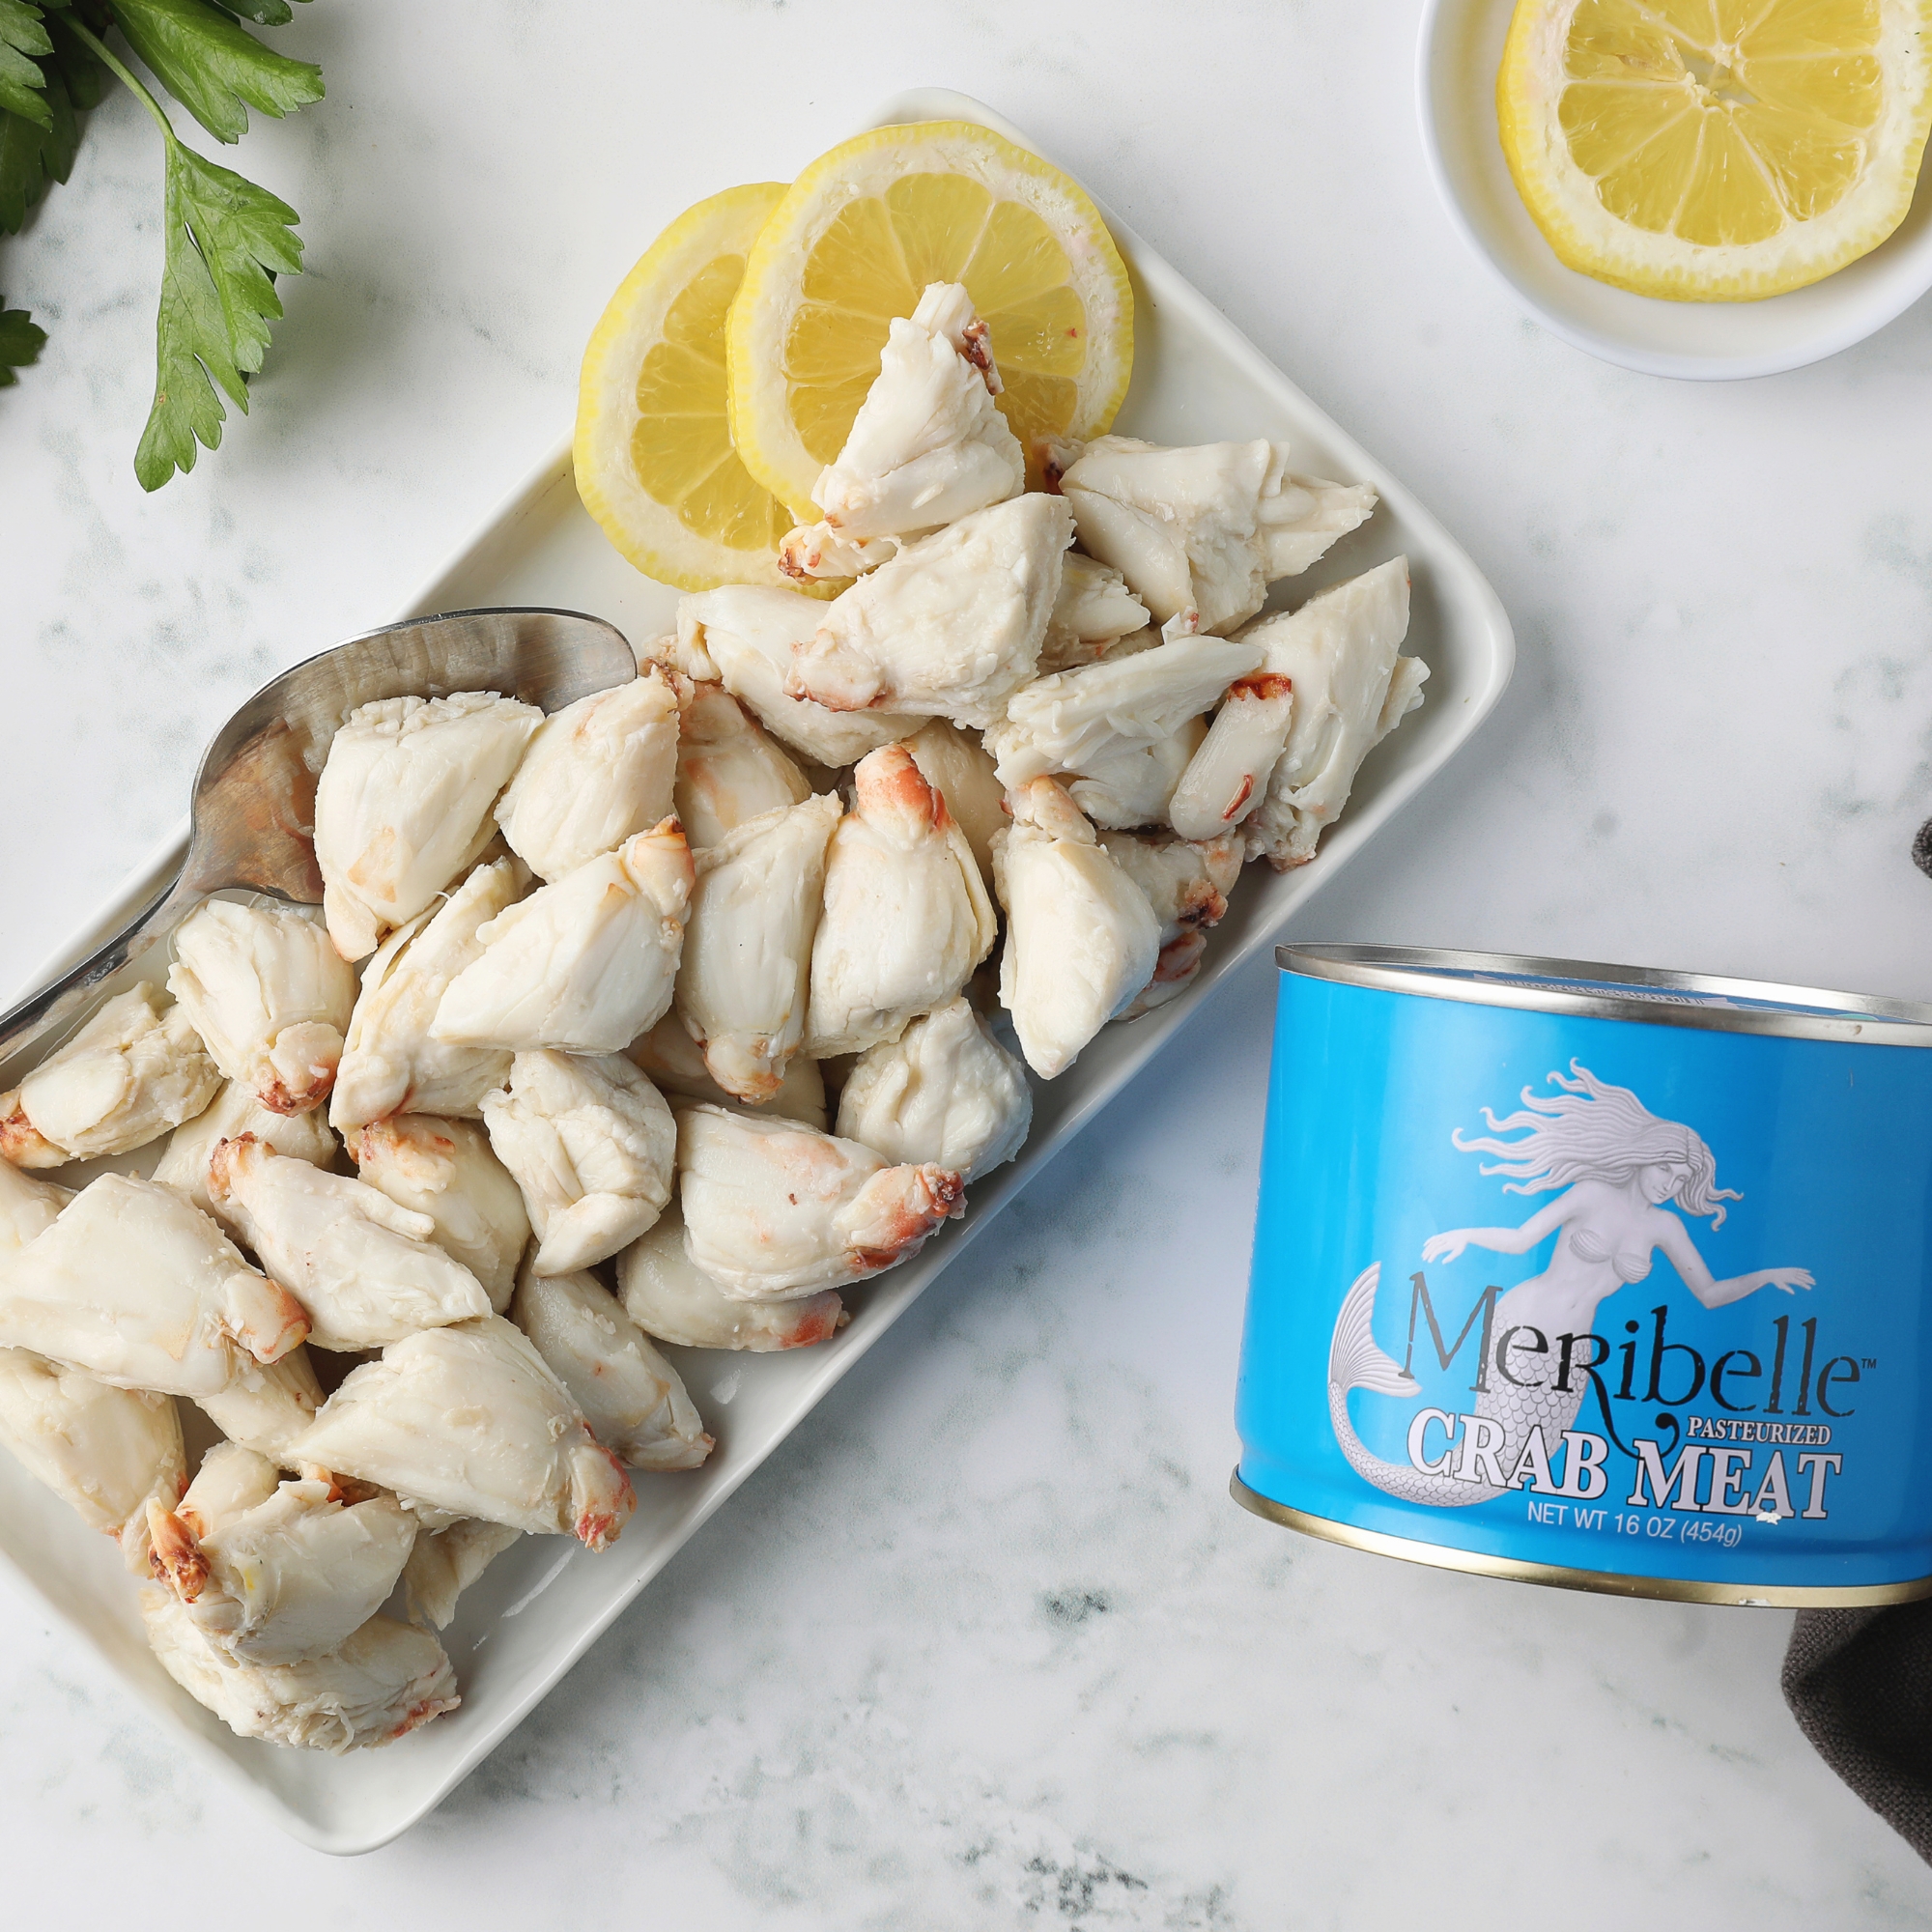 Image of For lighter fare in the summer heat, try our Mirabelle colossal crab meat.